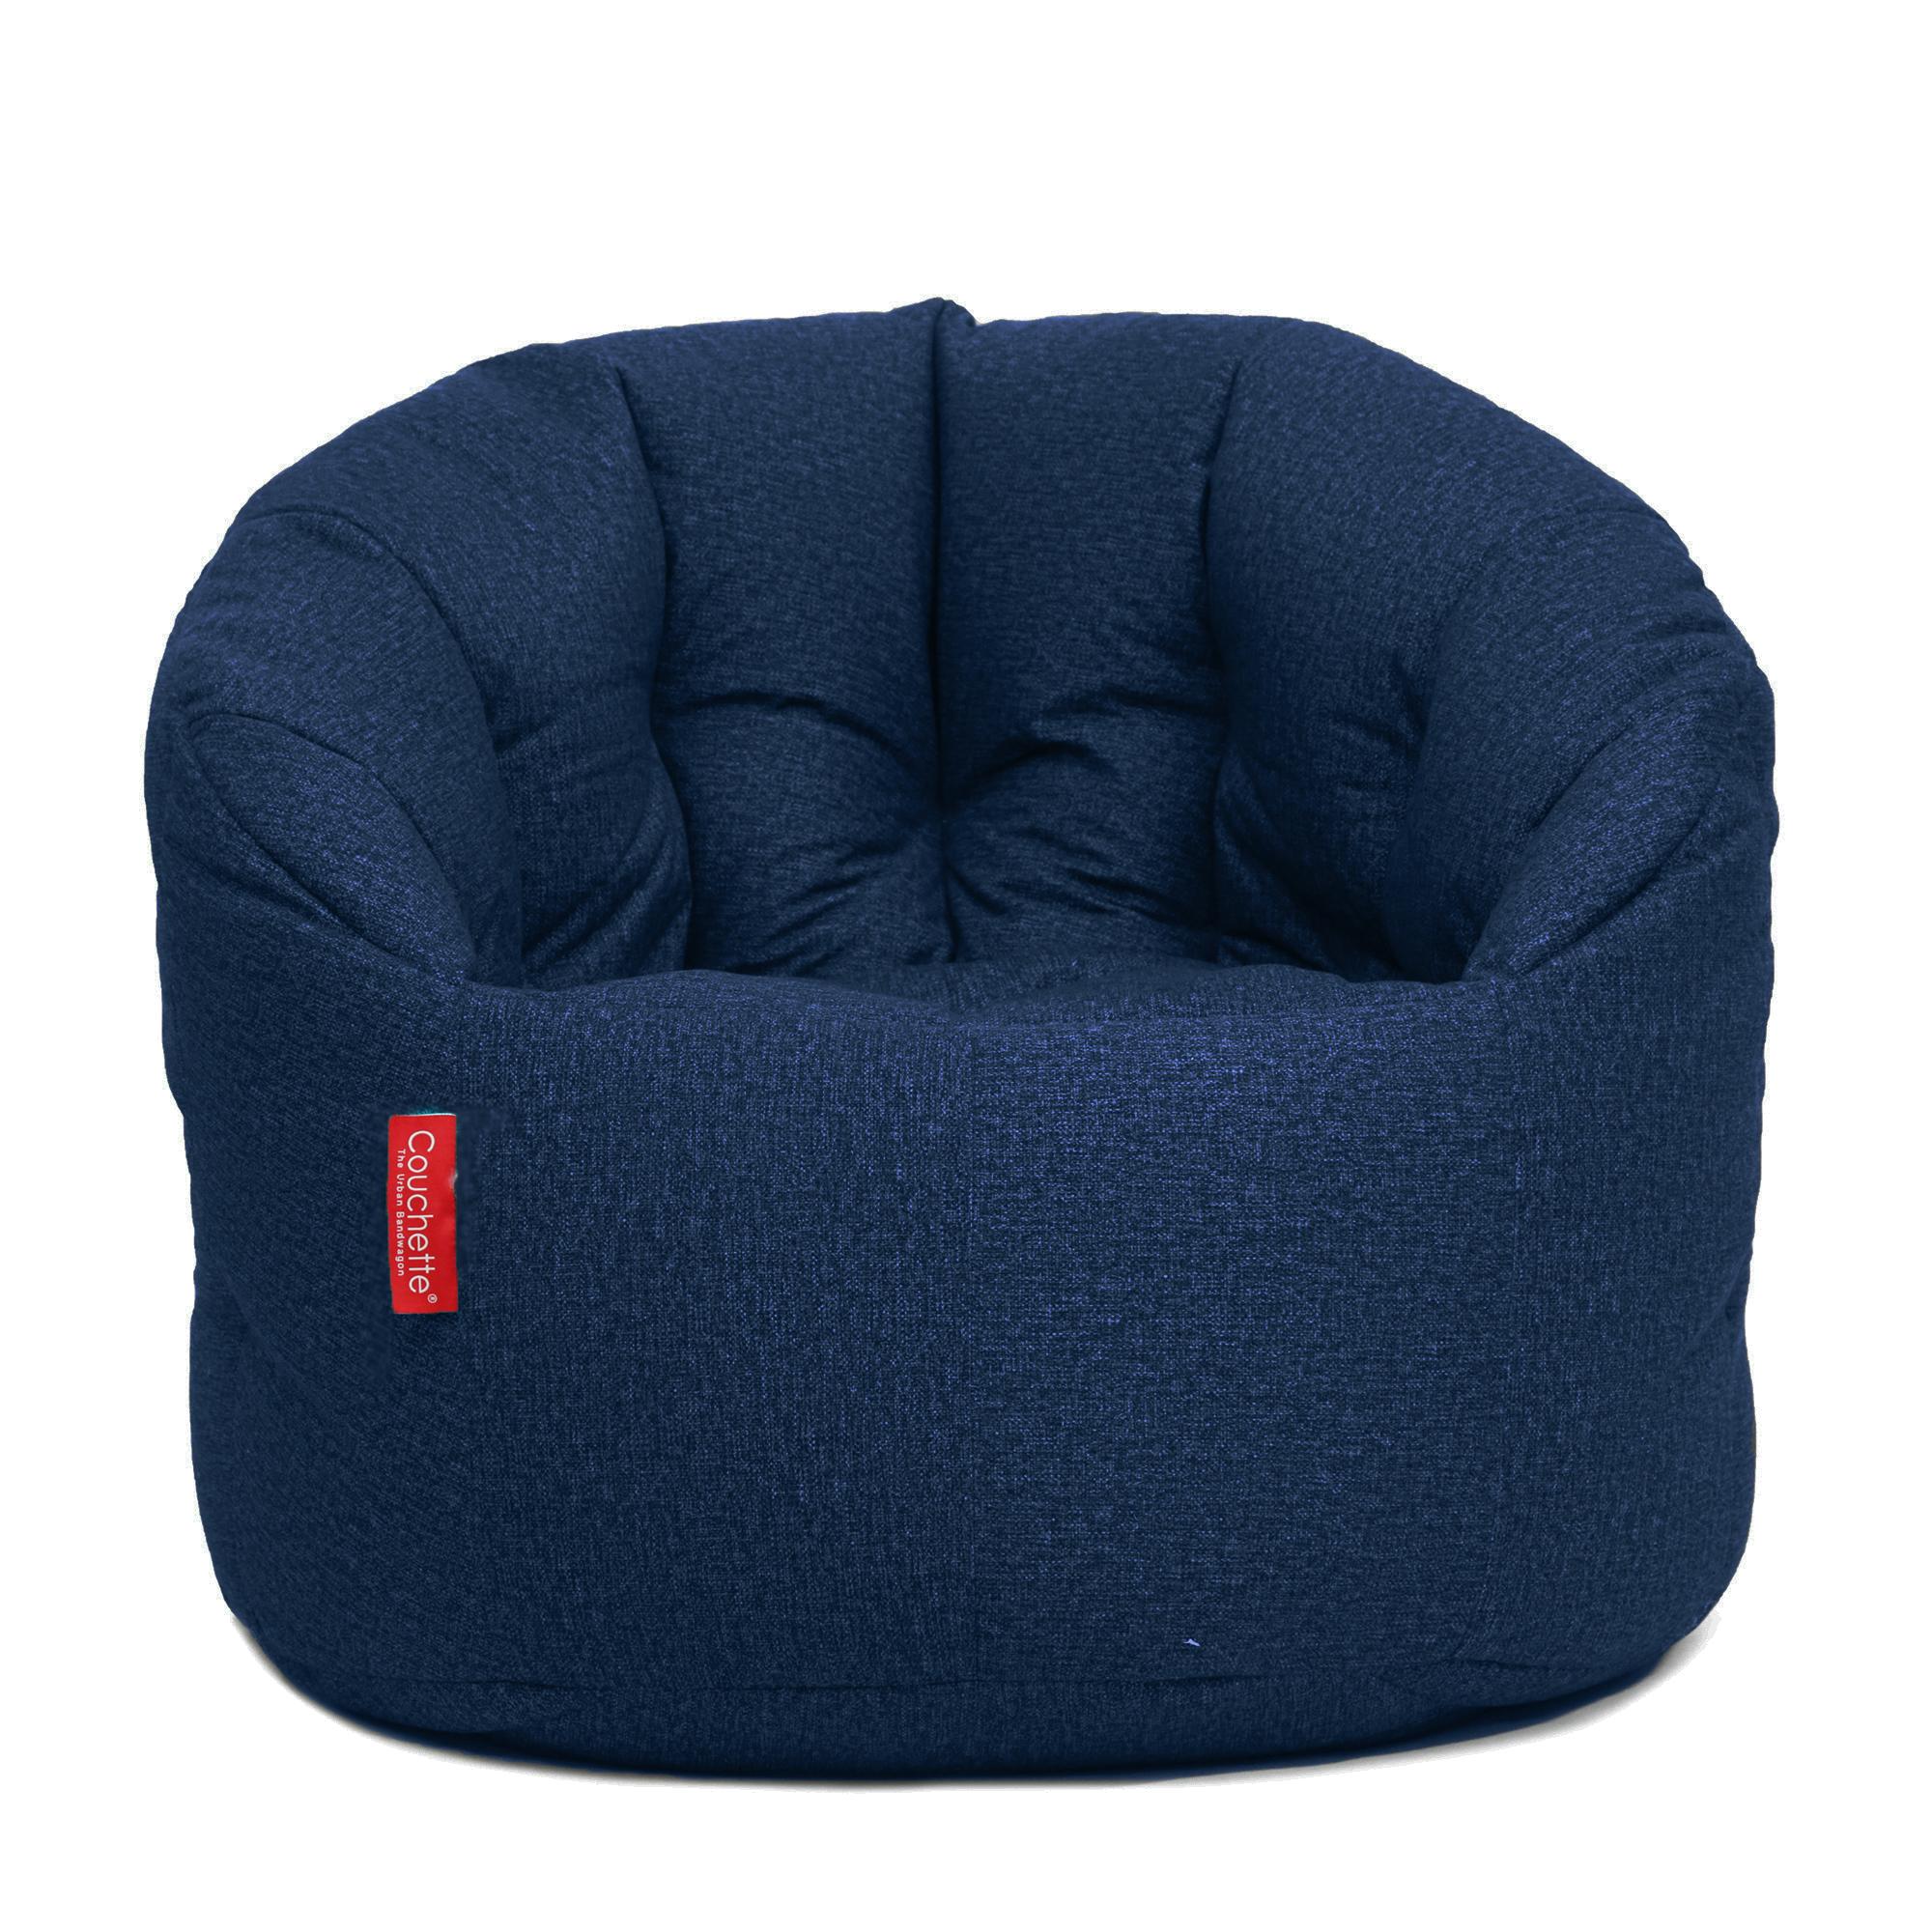 Couchette® Lush XL Arm Chair Cotton Suede Bean Bag in Sky Blue Finish  (Filled) : Amazon.in: Home & Kitchen